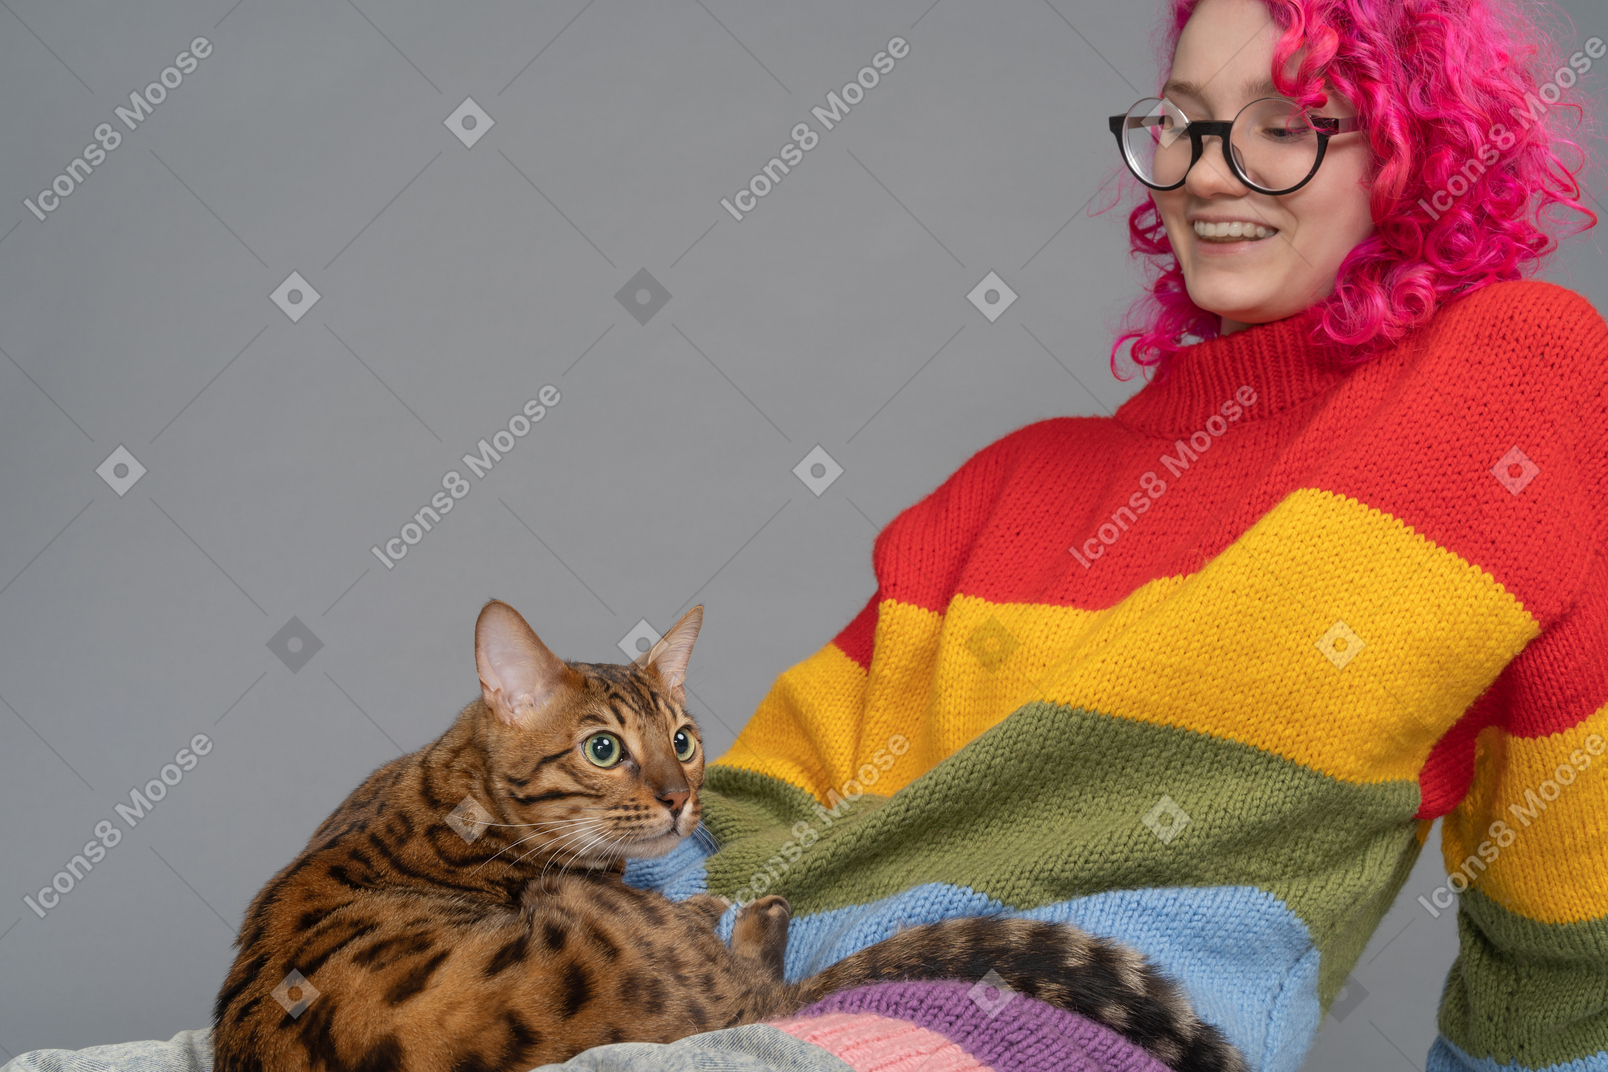 A smiling girl and her bengal cat